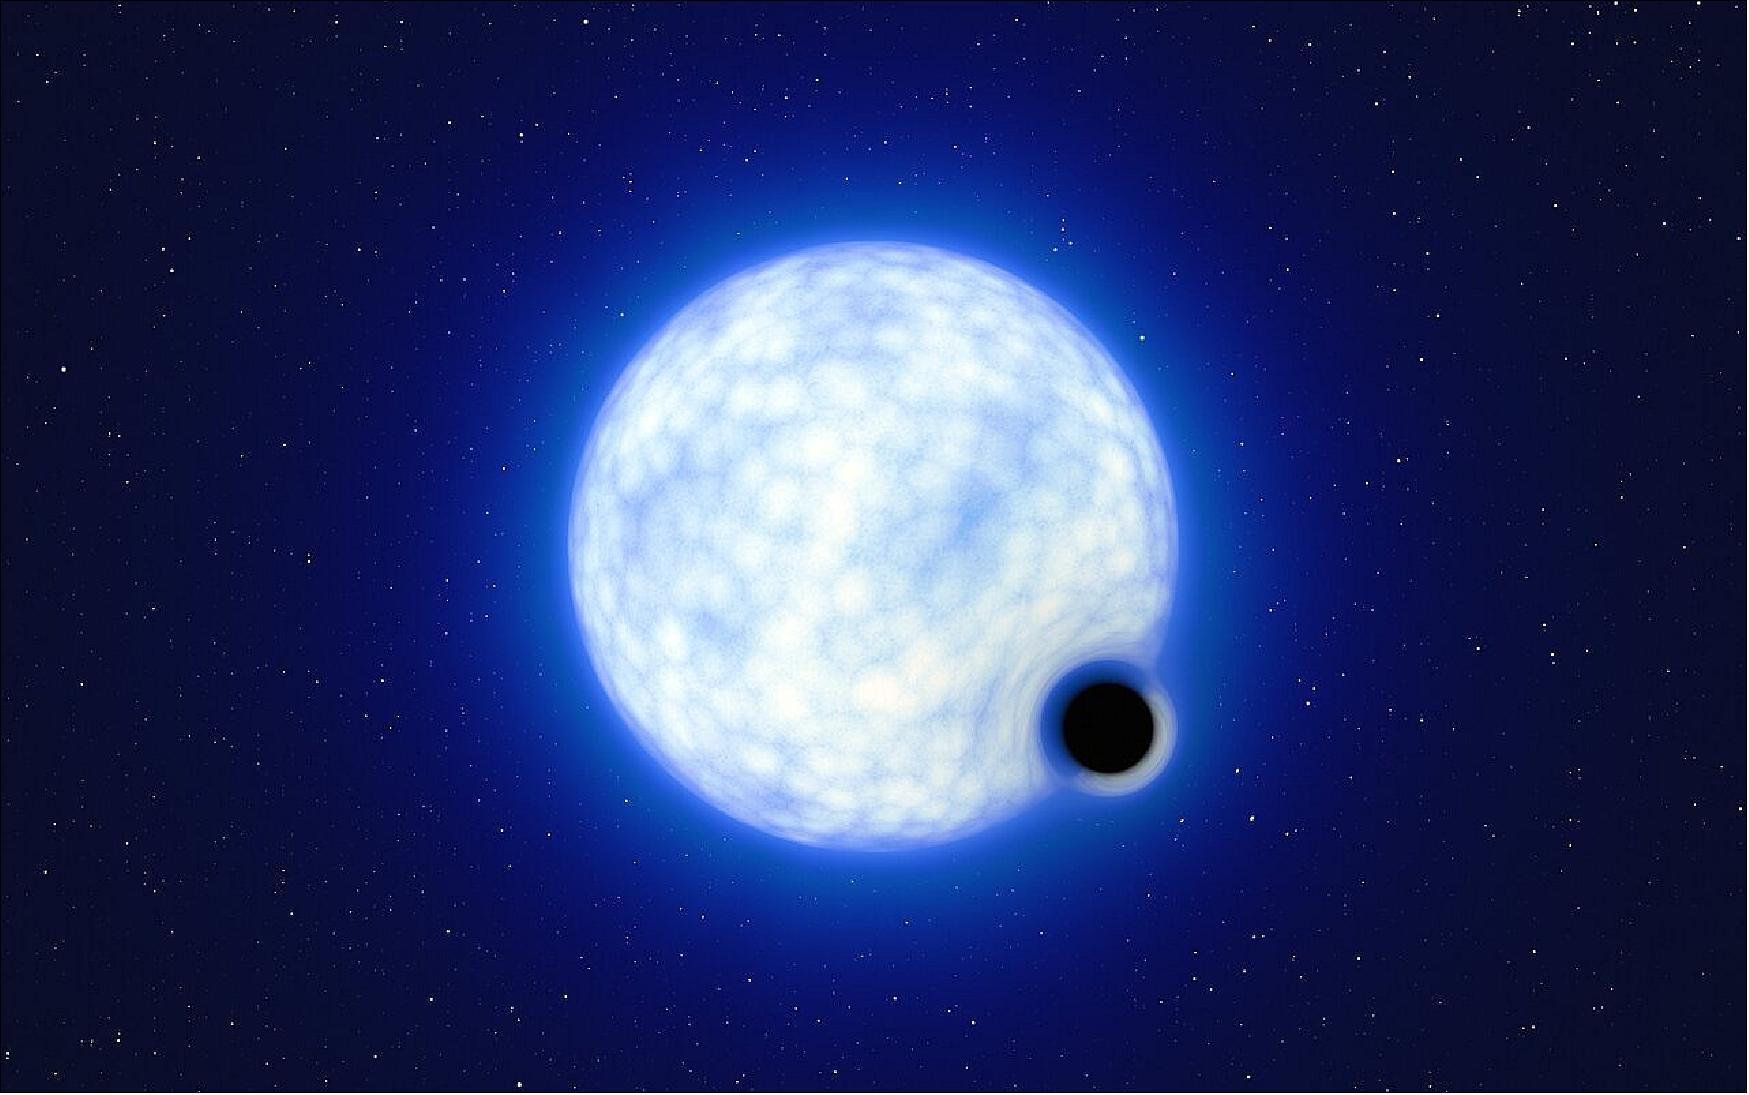 Figure 4: This artist’s impression shows what the binary system VFTS 243 might look like if we were observing it up close. The system, which is located in the Tarantula Nebula in the Large Magellanic Cloud, is composed of a hot, blue star with 25 times the Sun’s mass and a black hole, which is at least nine times the mass of the Sun. The sizes of the two binary components are not to scale: in reality, the blue star is about 200,000 times larger than the black hole. -Note that the 'lensing' effect around the black hole is shown for illustration purposes only, to make this dark object more noticeable in the image. The inclination of the system means that, when looking at it from Earth, we cannot observe the black hole eclipsing the star (image credit: ESO/L. Calçada)